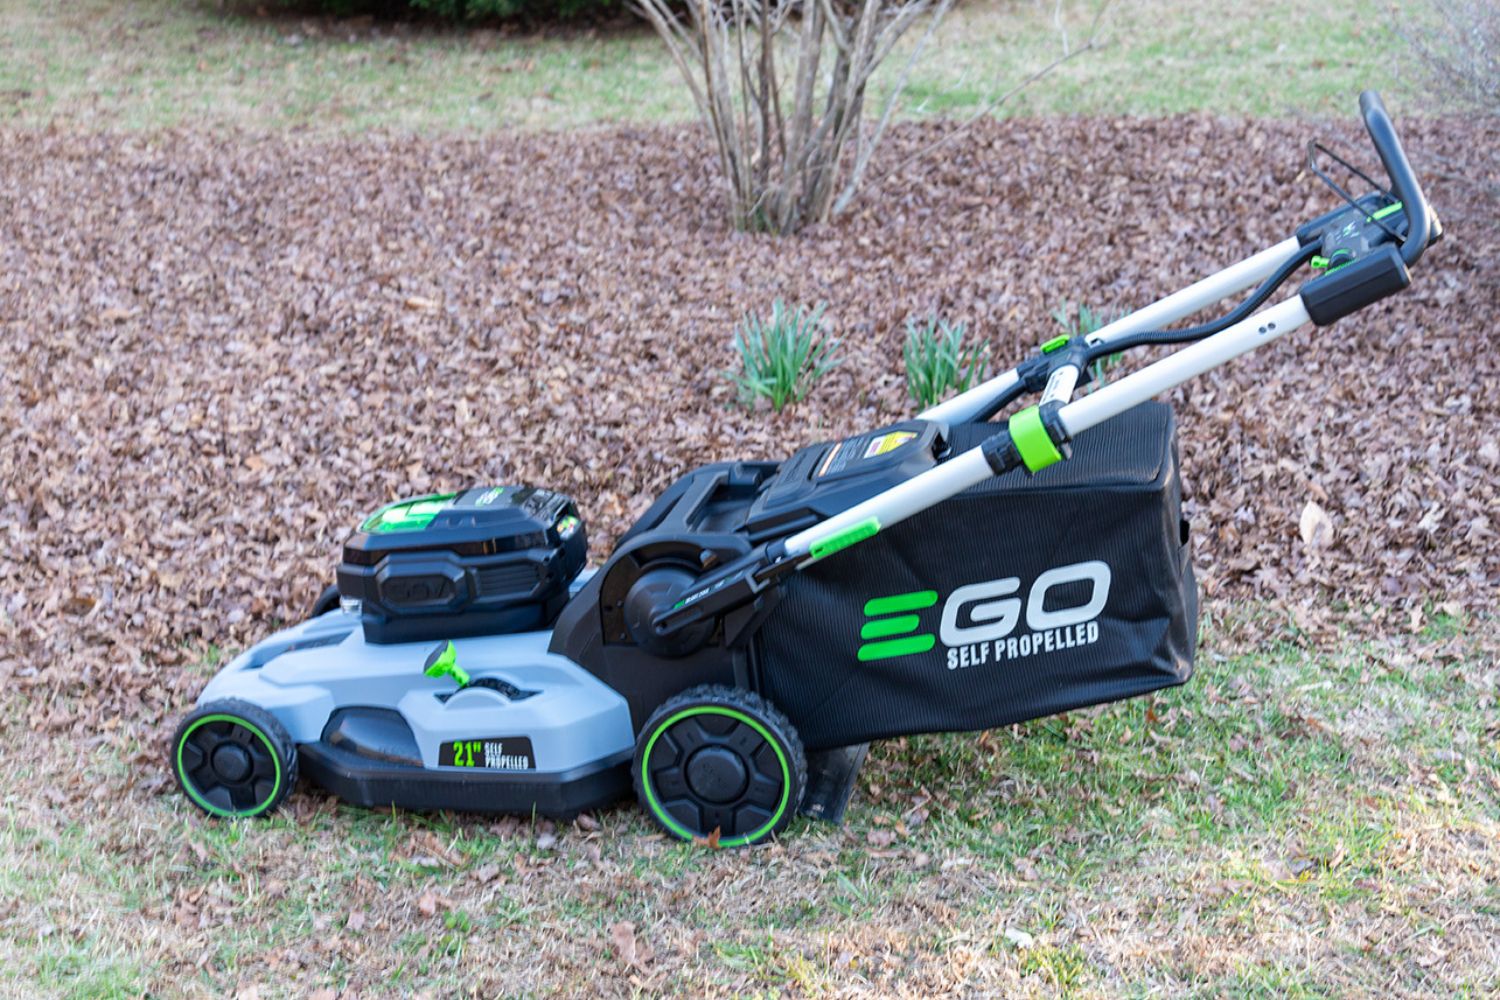 Ego Power+ 21-Inch Self-Propelled Lawn Mower Review: Is It Worth It? -  Tested by Bob Vila